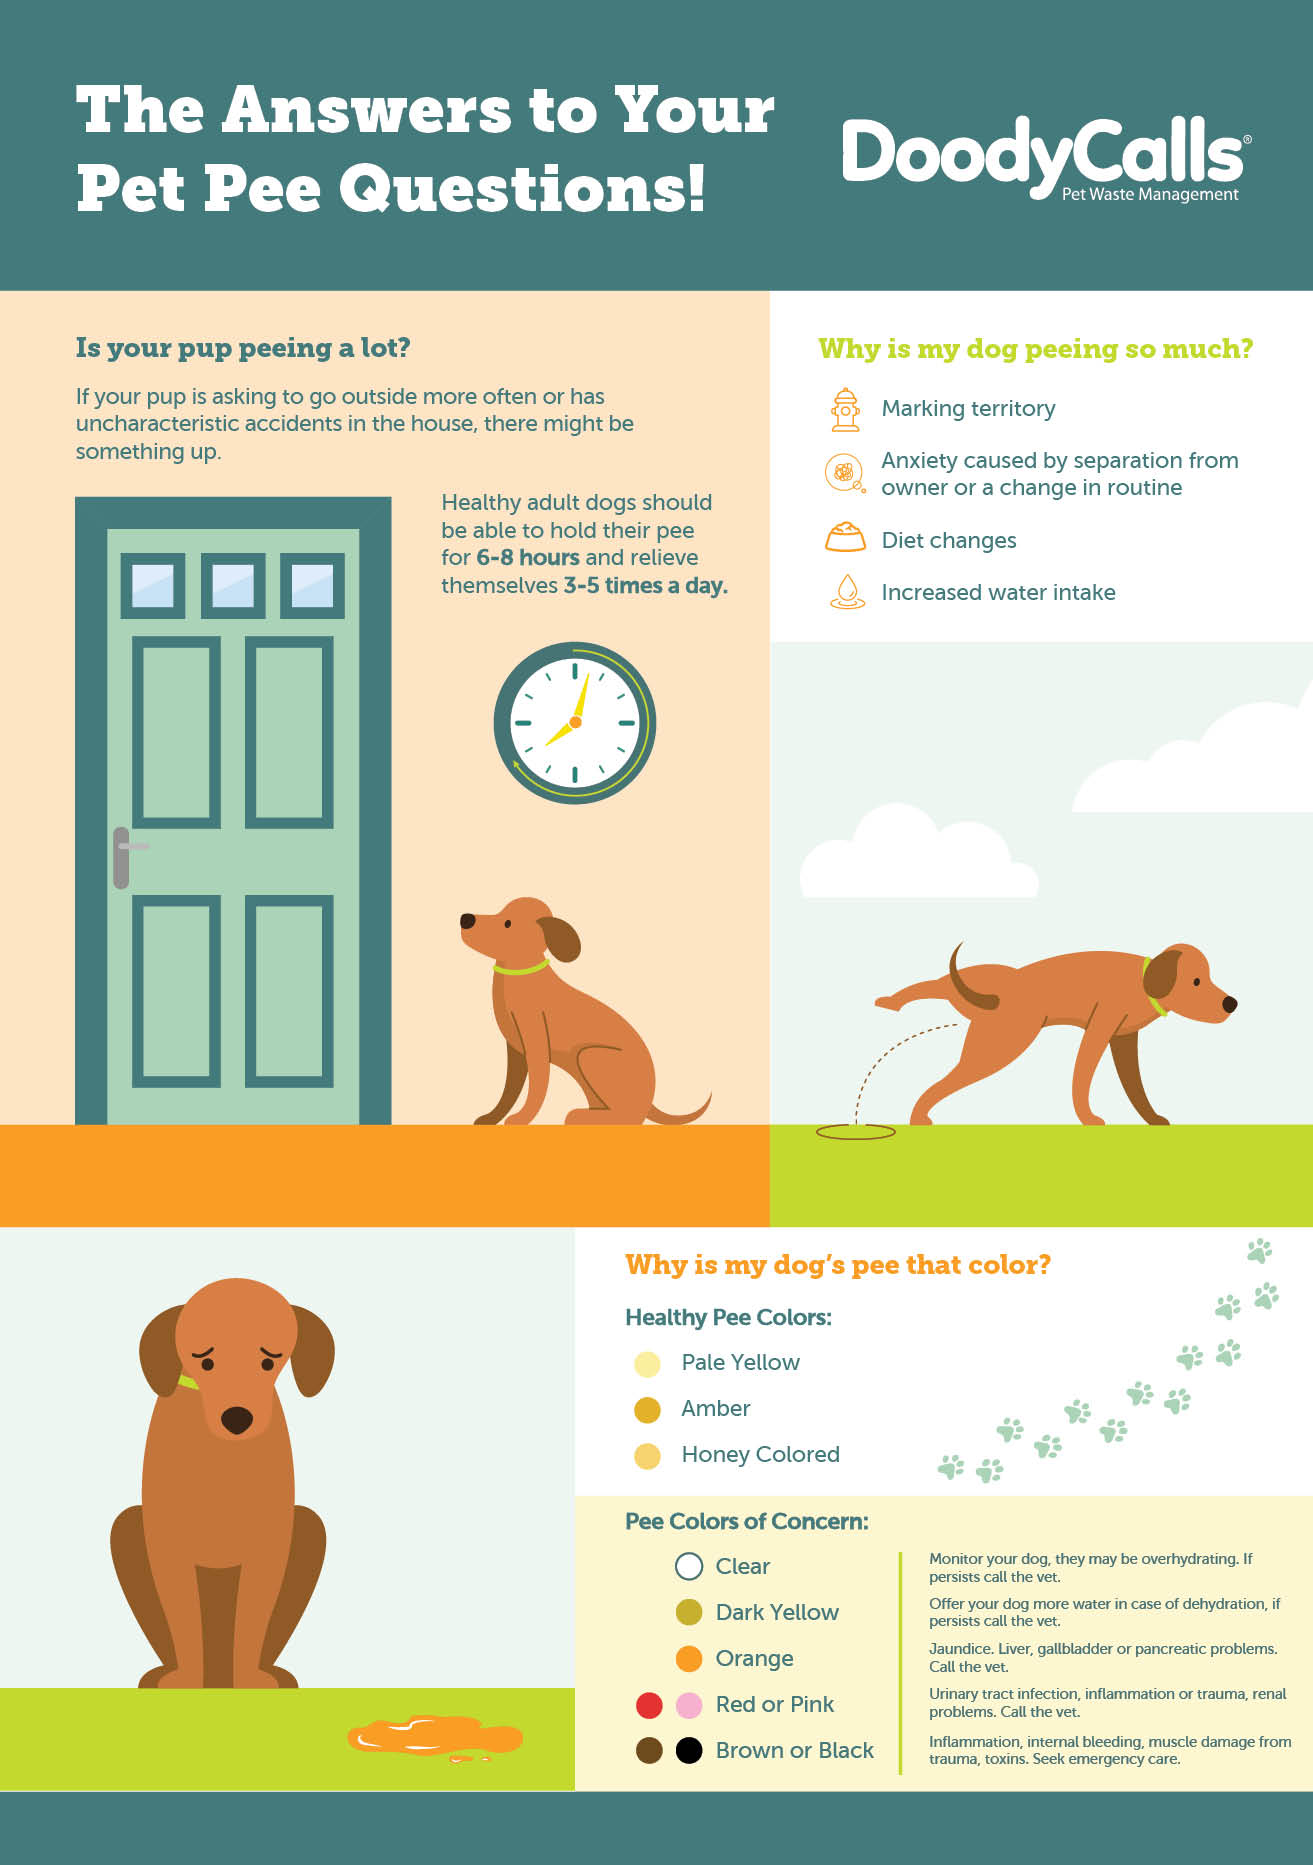 The Answers to Your Pet Pee Questions